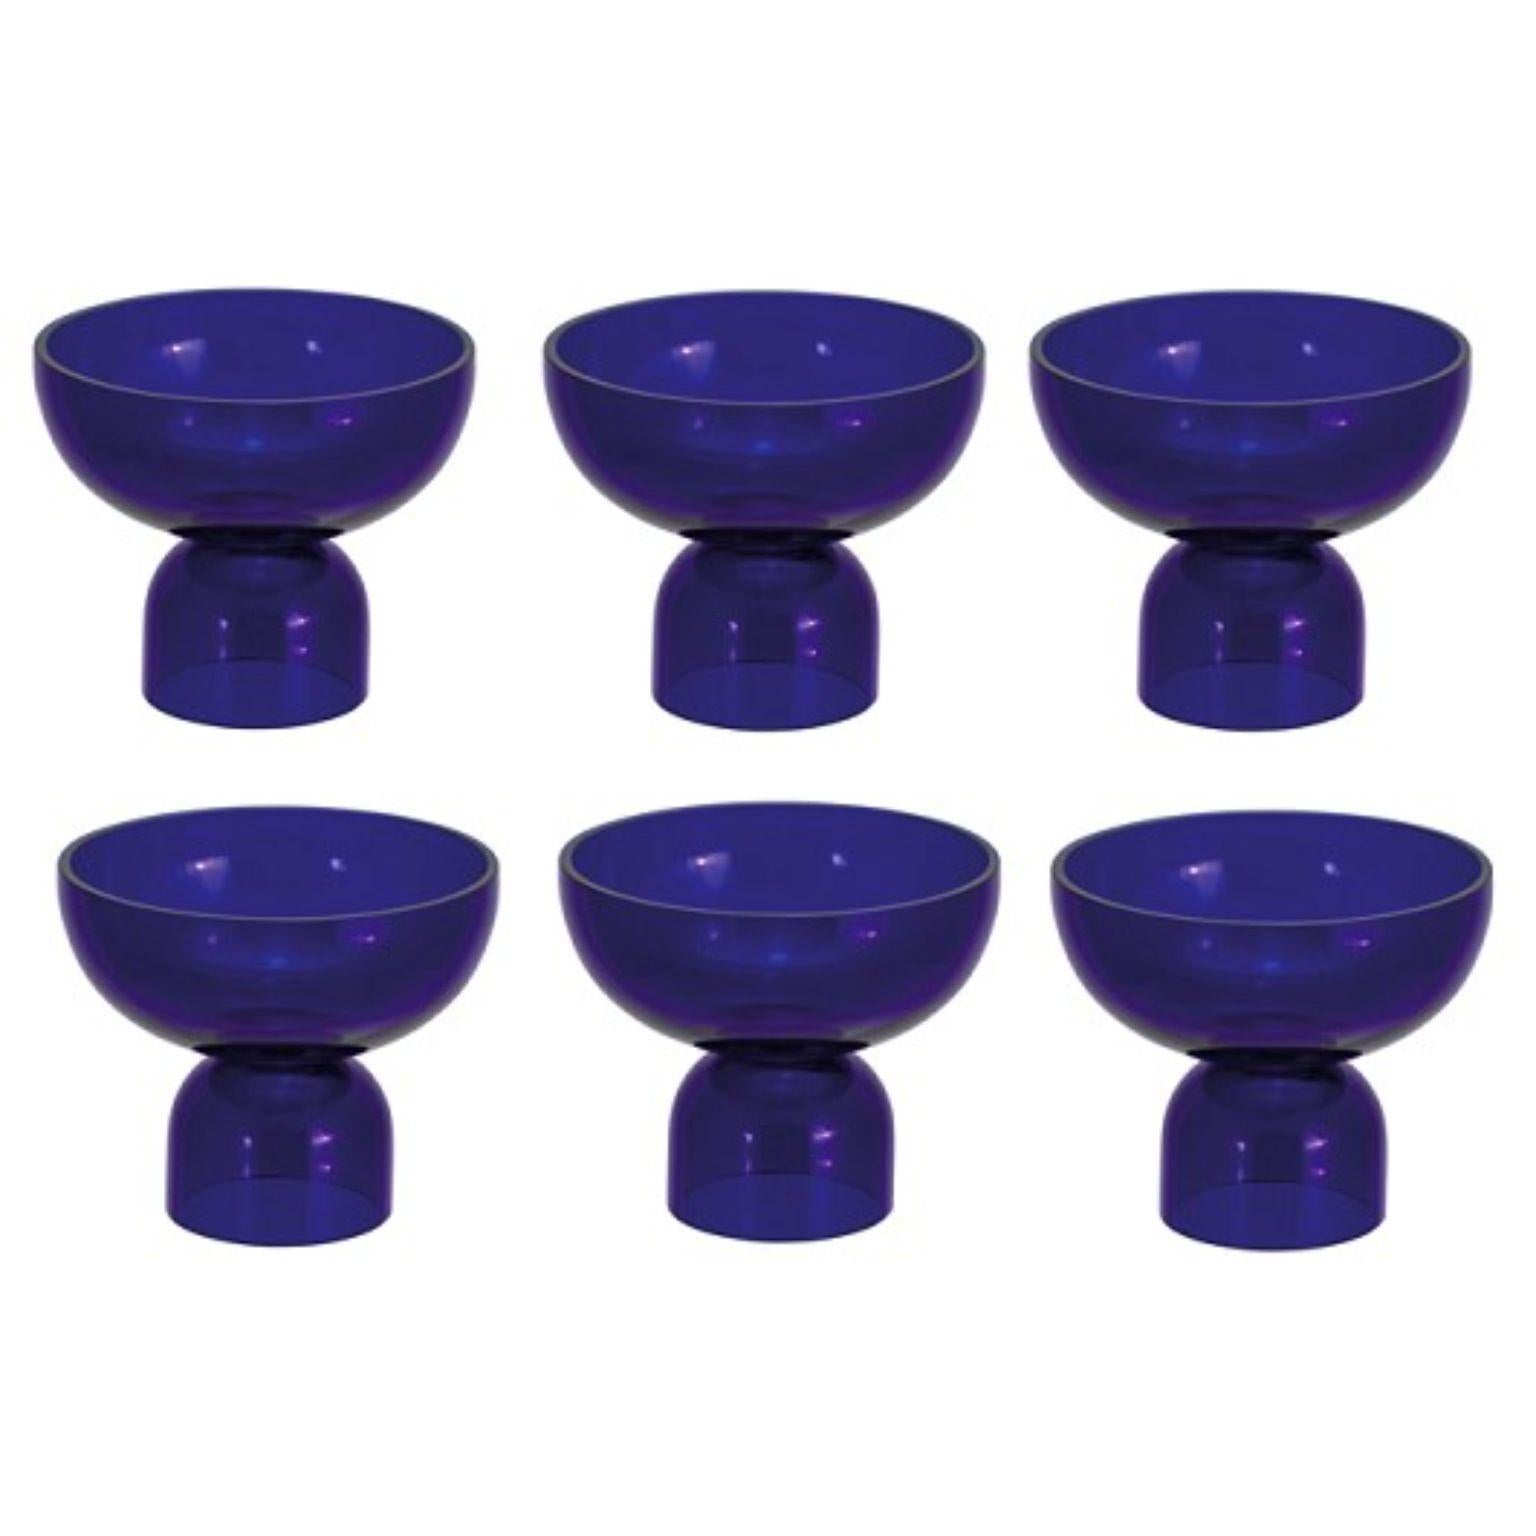 Set of 6 Cobalt Glasses by Pulpo
Dimensions: D11 x H9 cm
Materials: handmade glass

Pick them, pour them, roll them, and hold them; a kaleidoscope of colour, form and texture awaits. The potpourri collections by German designer Meike Harde transport